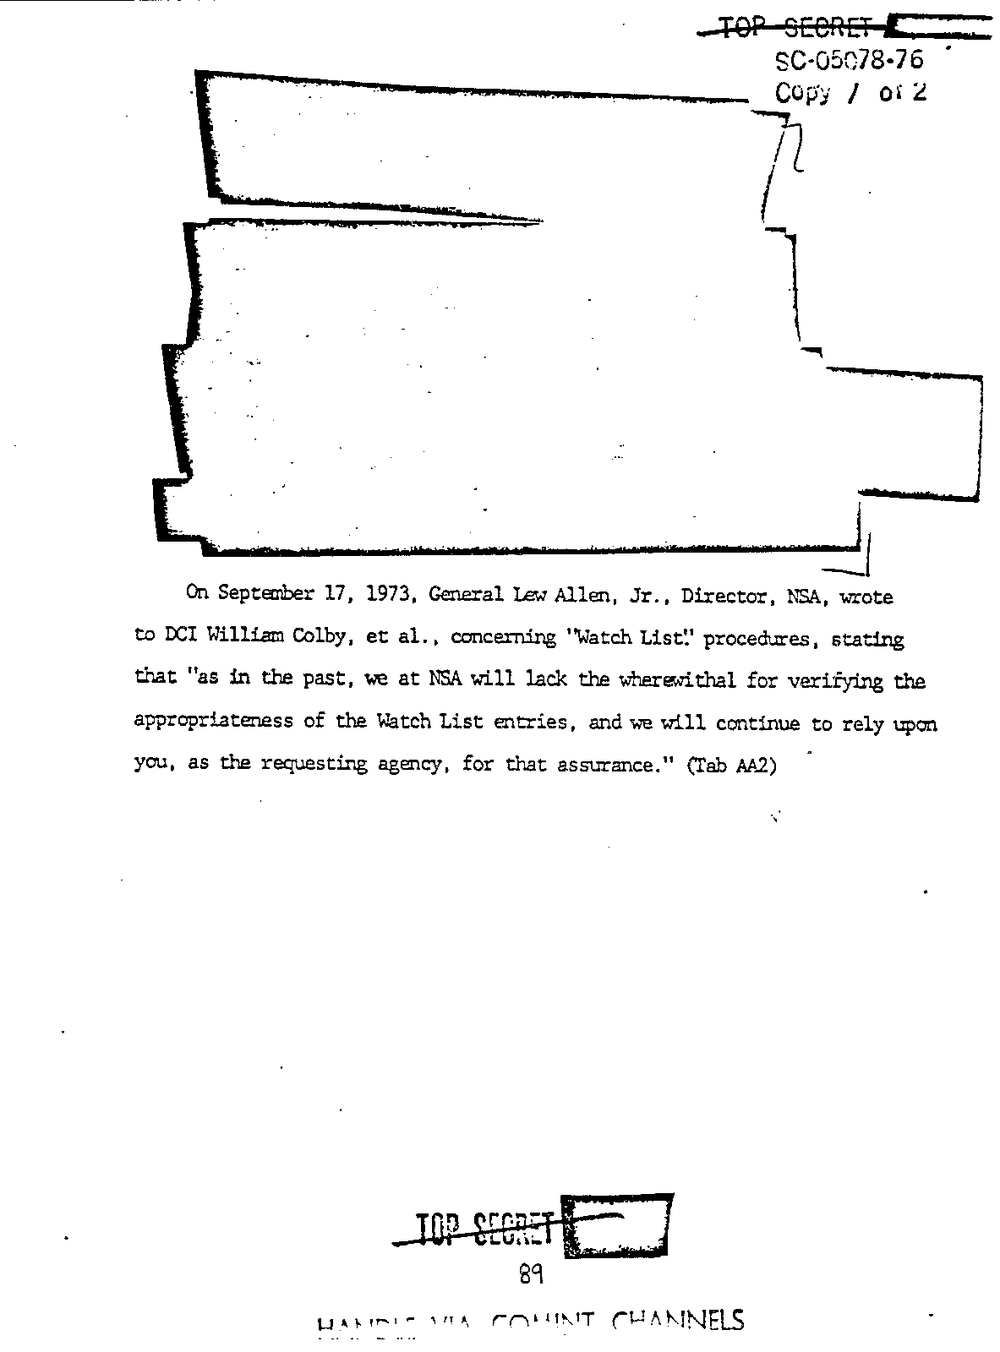 Page 97 from Report on Inquiry Into CIA Related Electronic Surveillance Activities